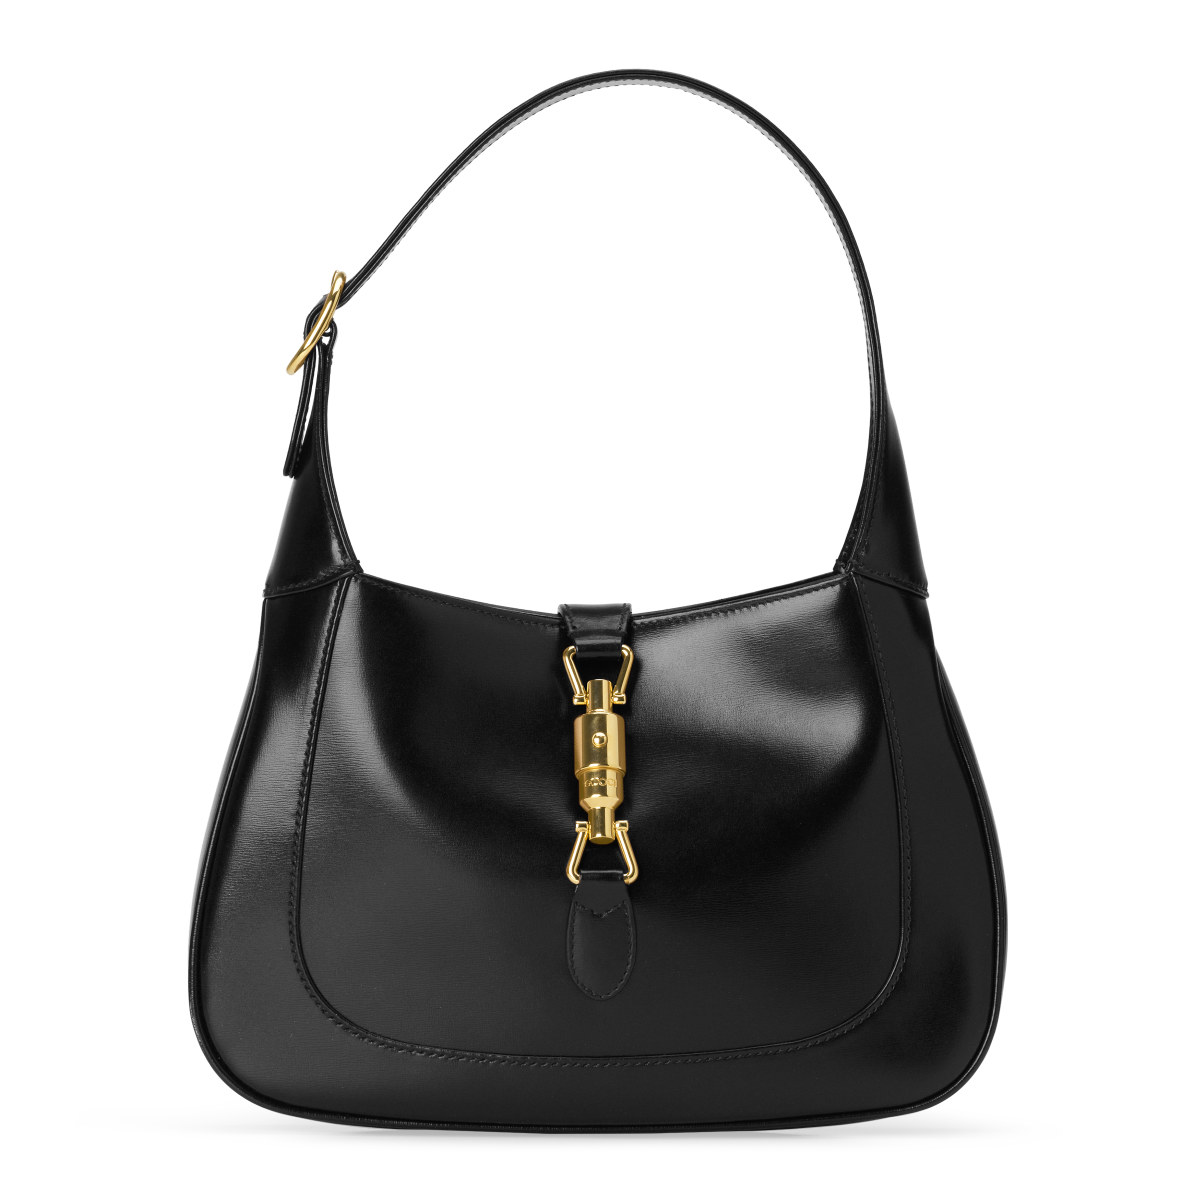 Gucci Presents The Latest Styles From The Signature Handbag Line Jackie 1961